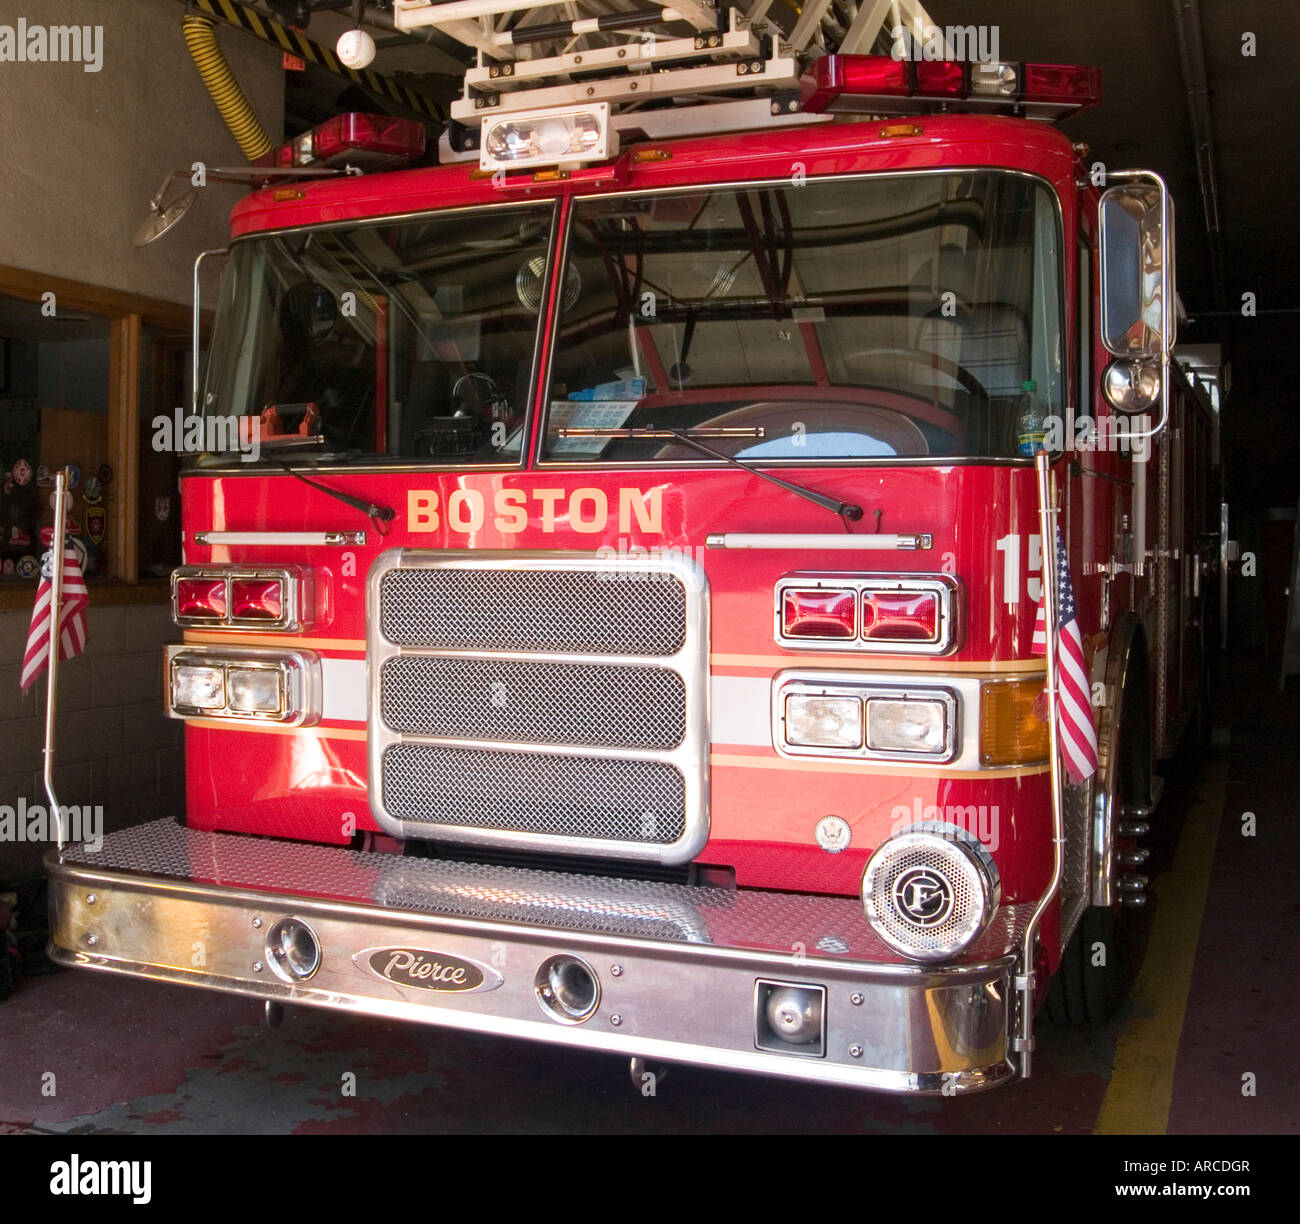 A bright red fire engine parked in a station in downtown Boston, Massachusetts USA Stock Photo